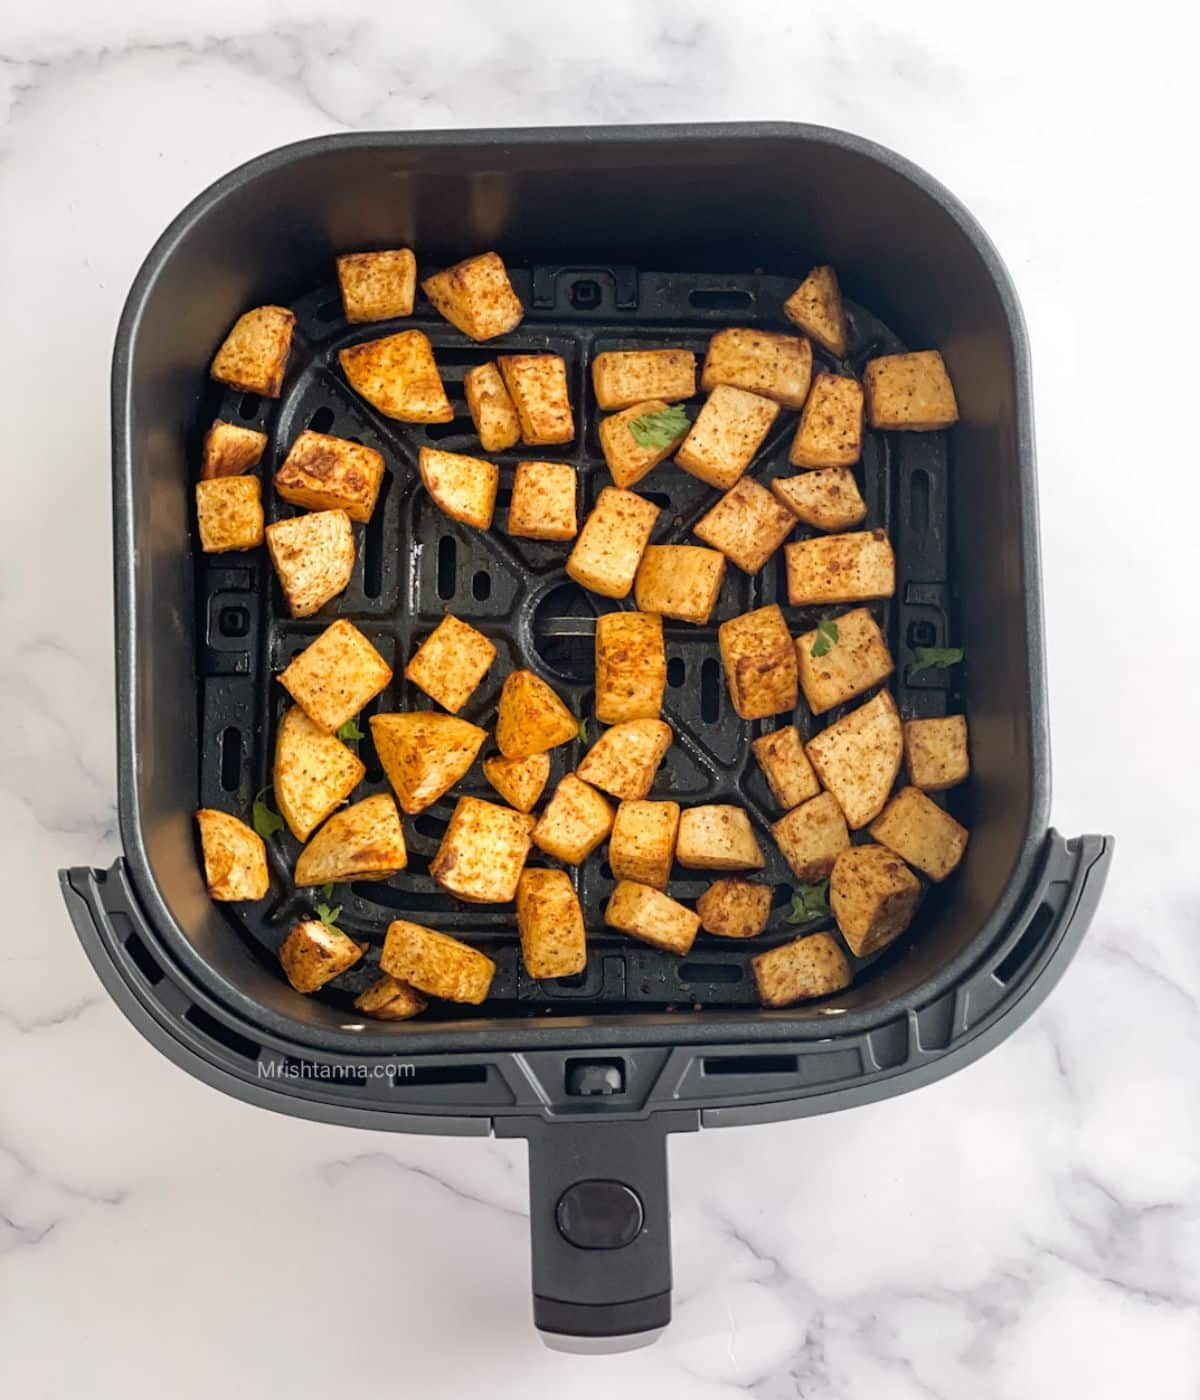 The air fryer basket is with roasted turnips.